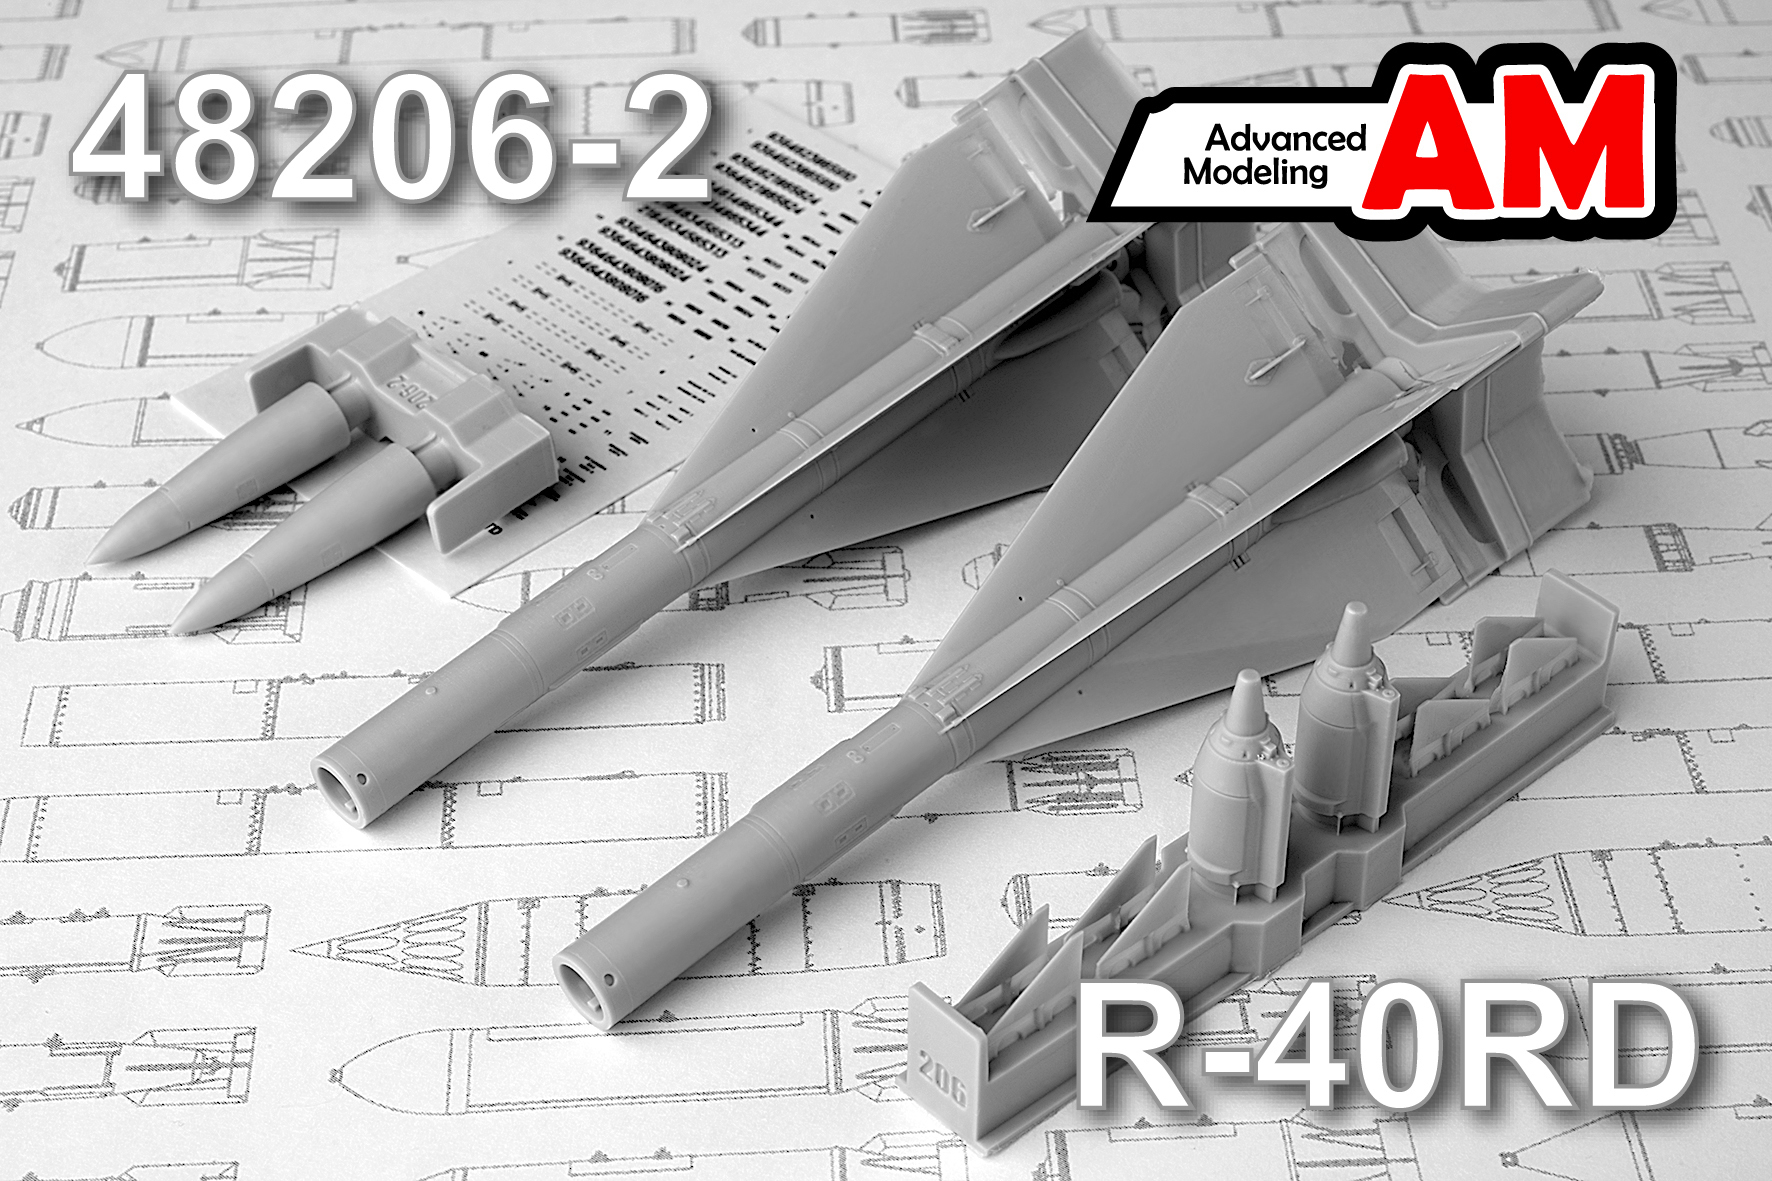 Additions (3D resin printing) 1/48 R-40D Air to Air missile (Advanced Modeling) 